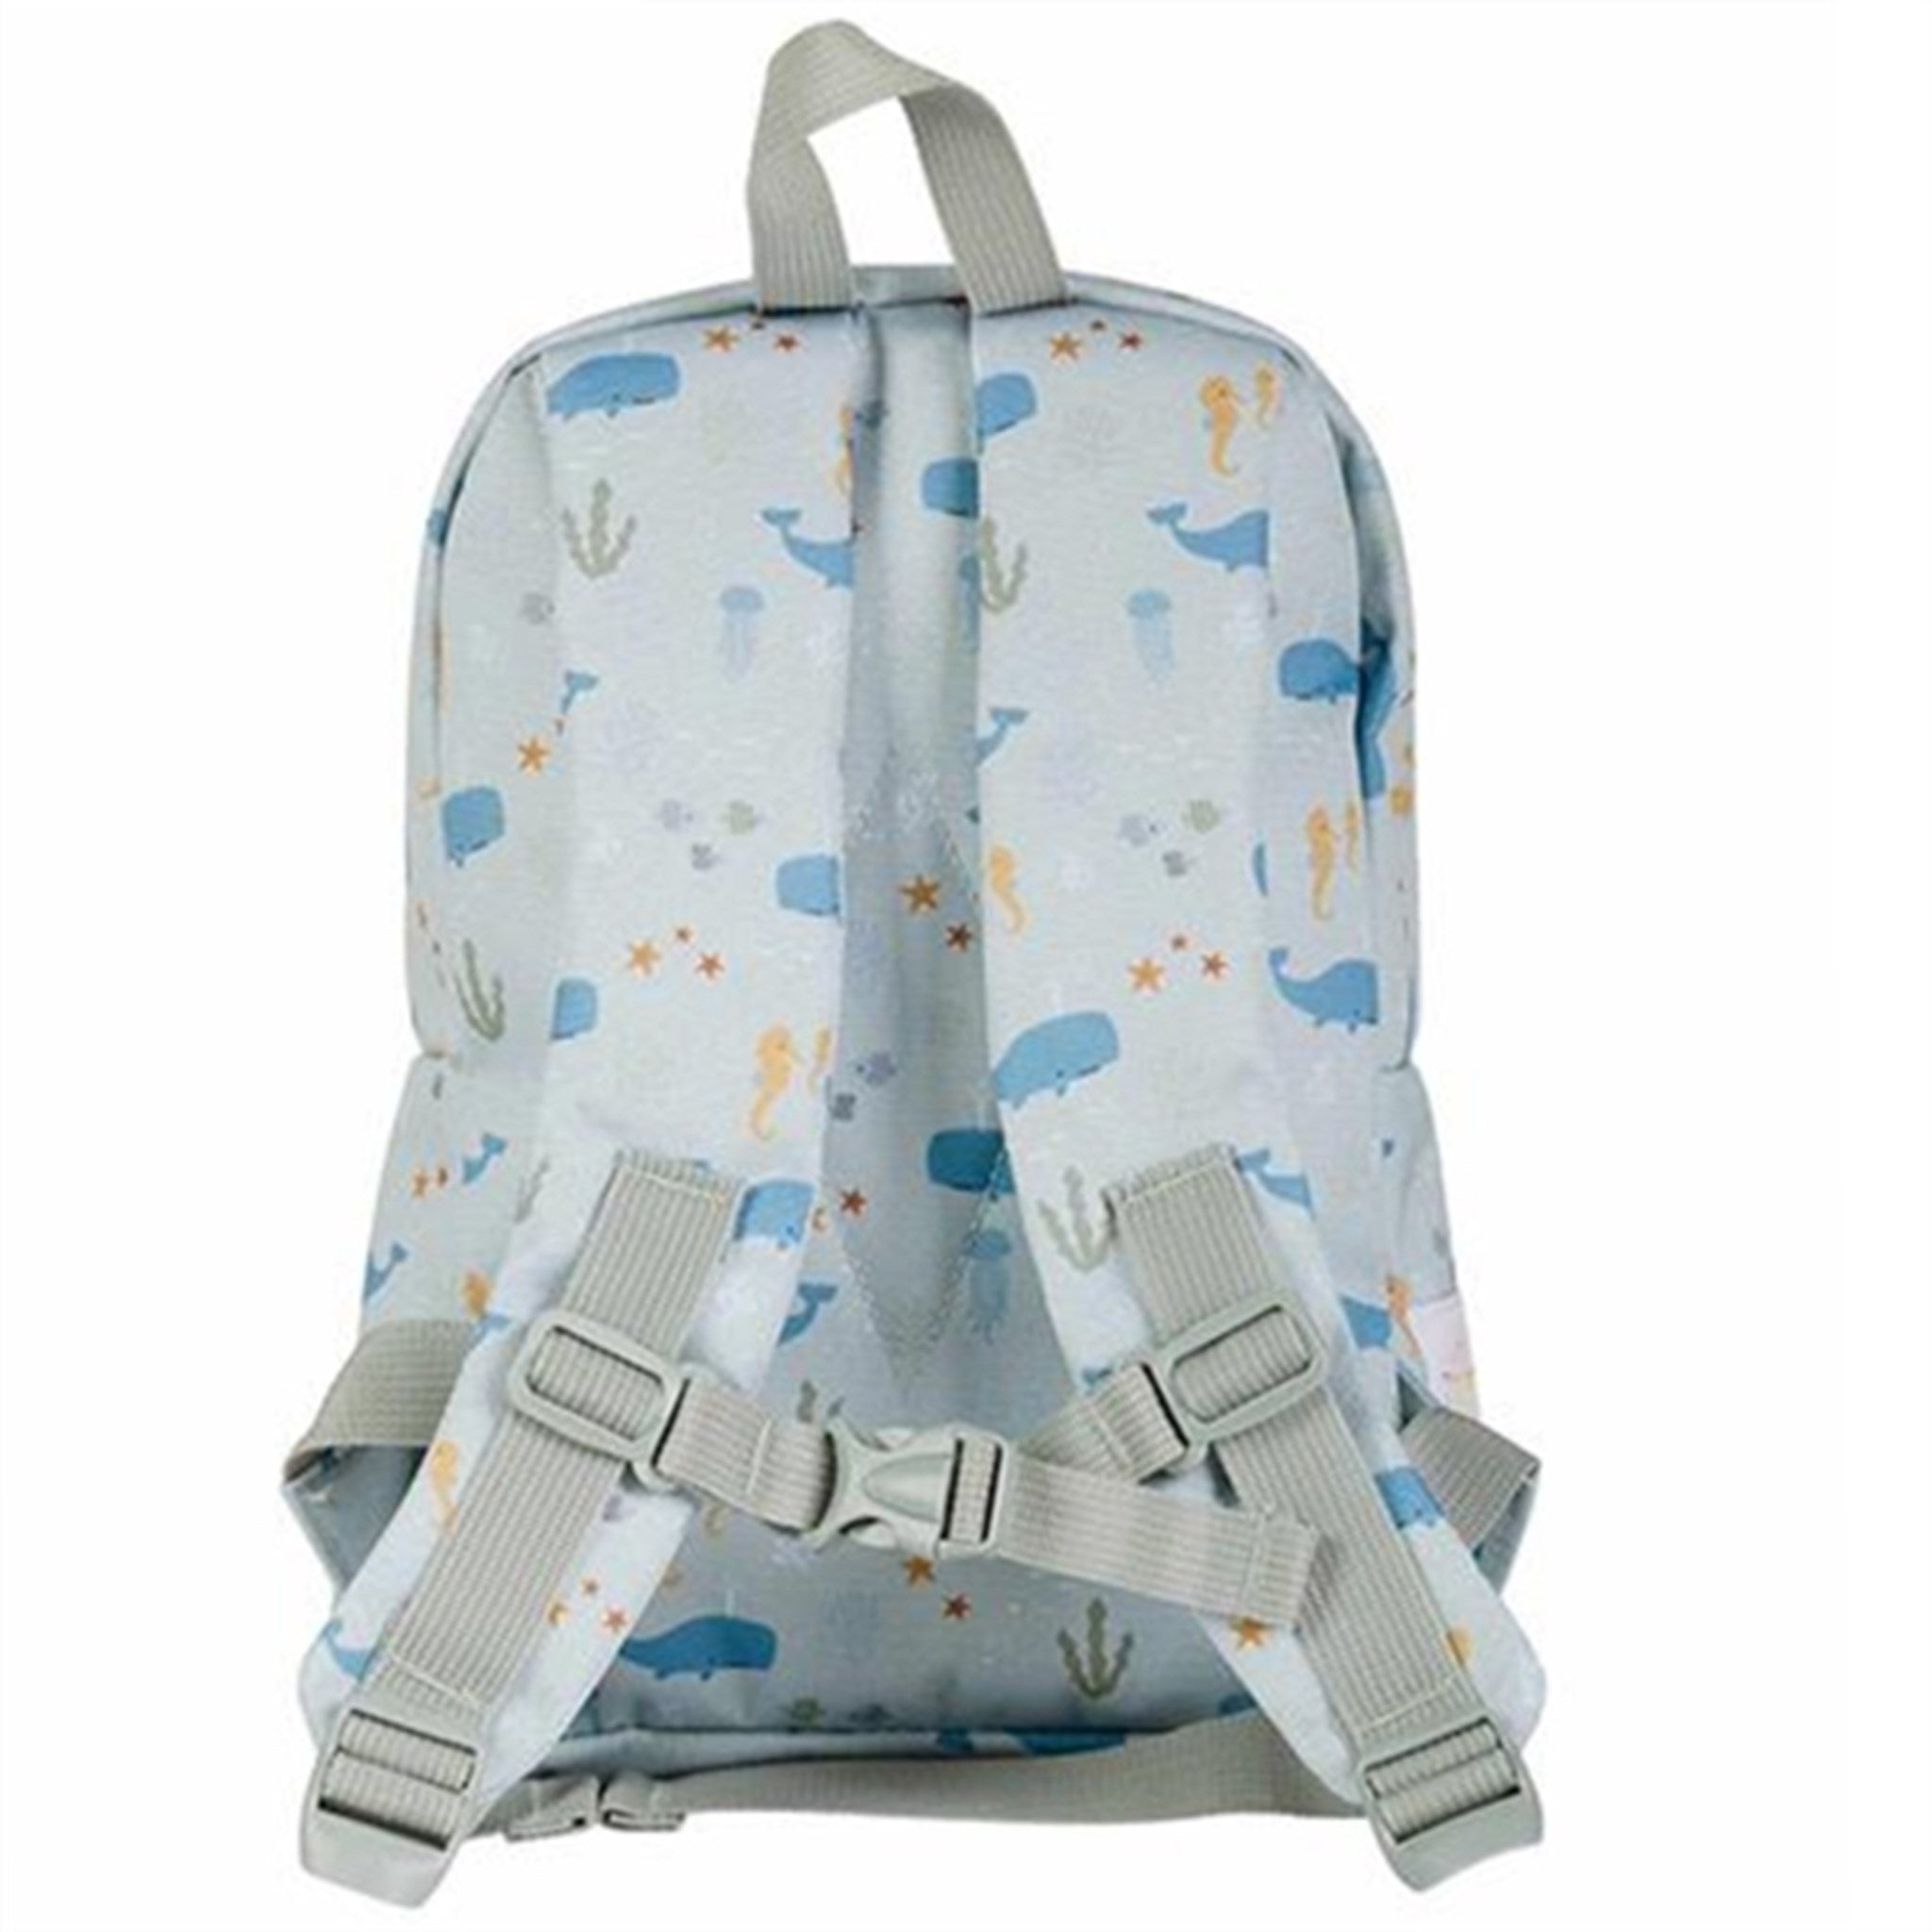 A Little Lovely Company Backpack Small Ocean 6